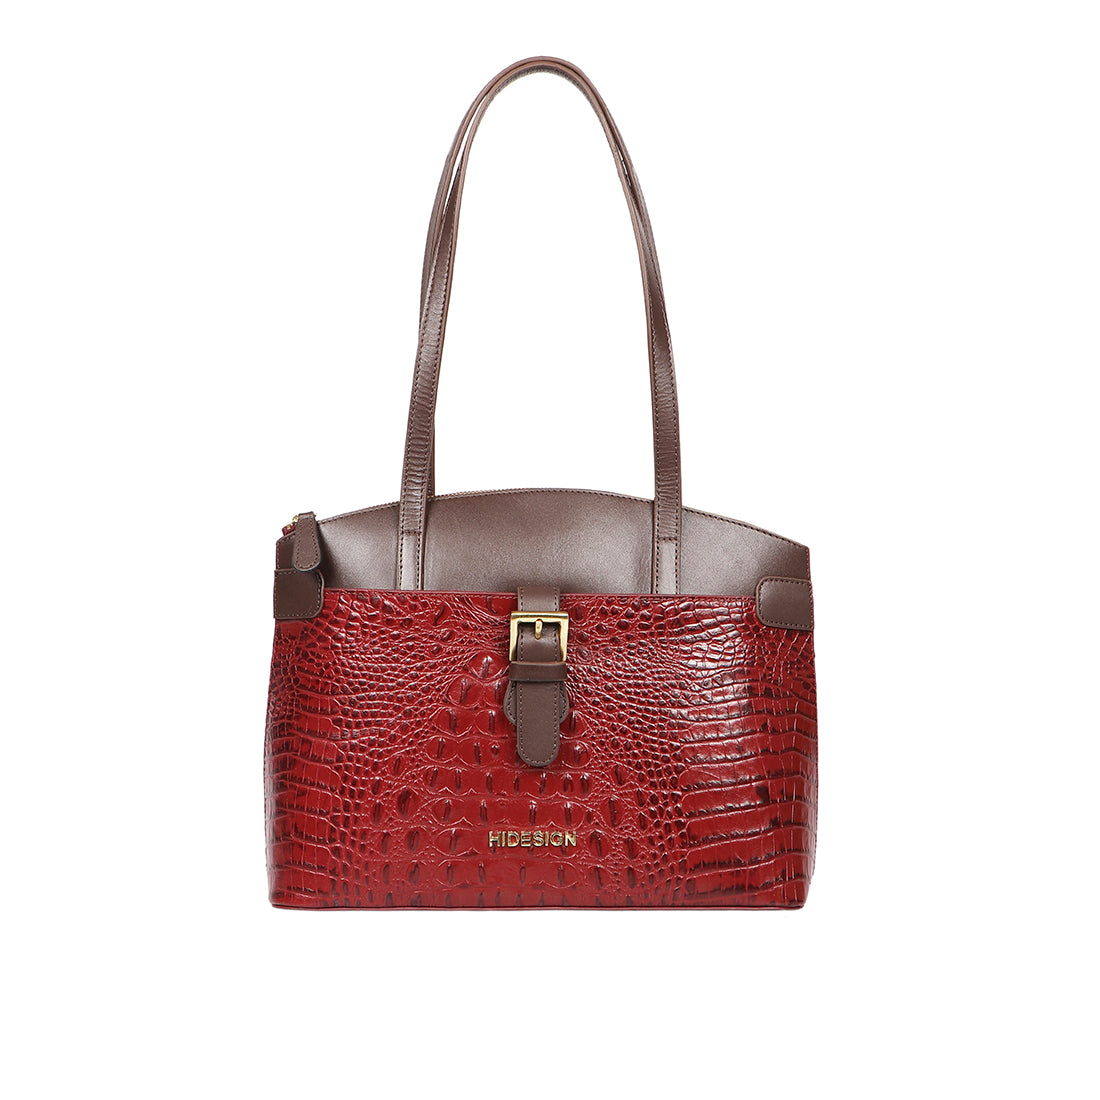 Luxe Purses - Trusted Online Reseller of Authentic Designer Handbags